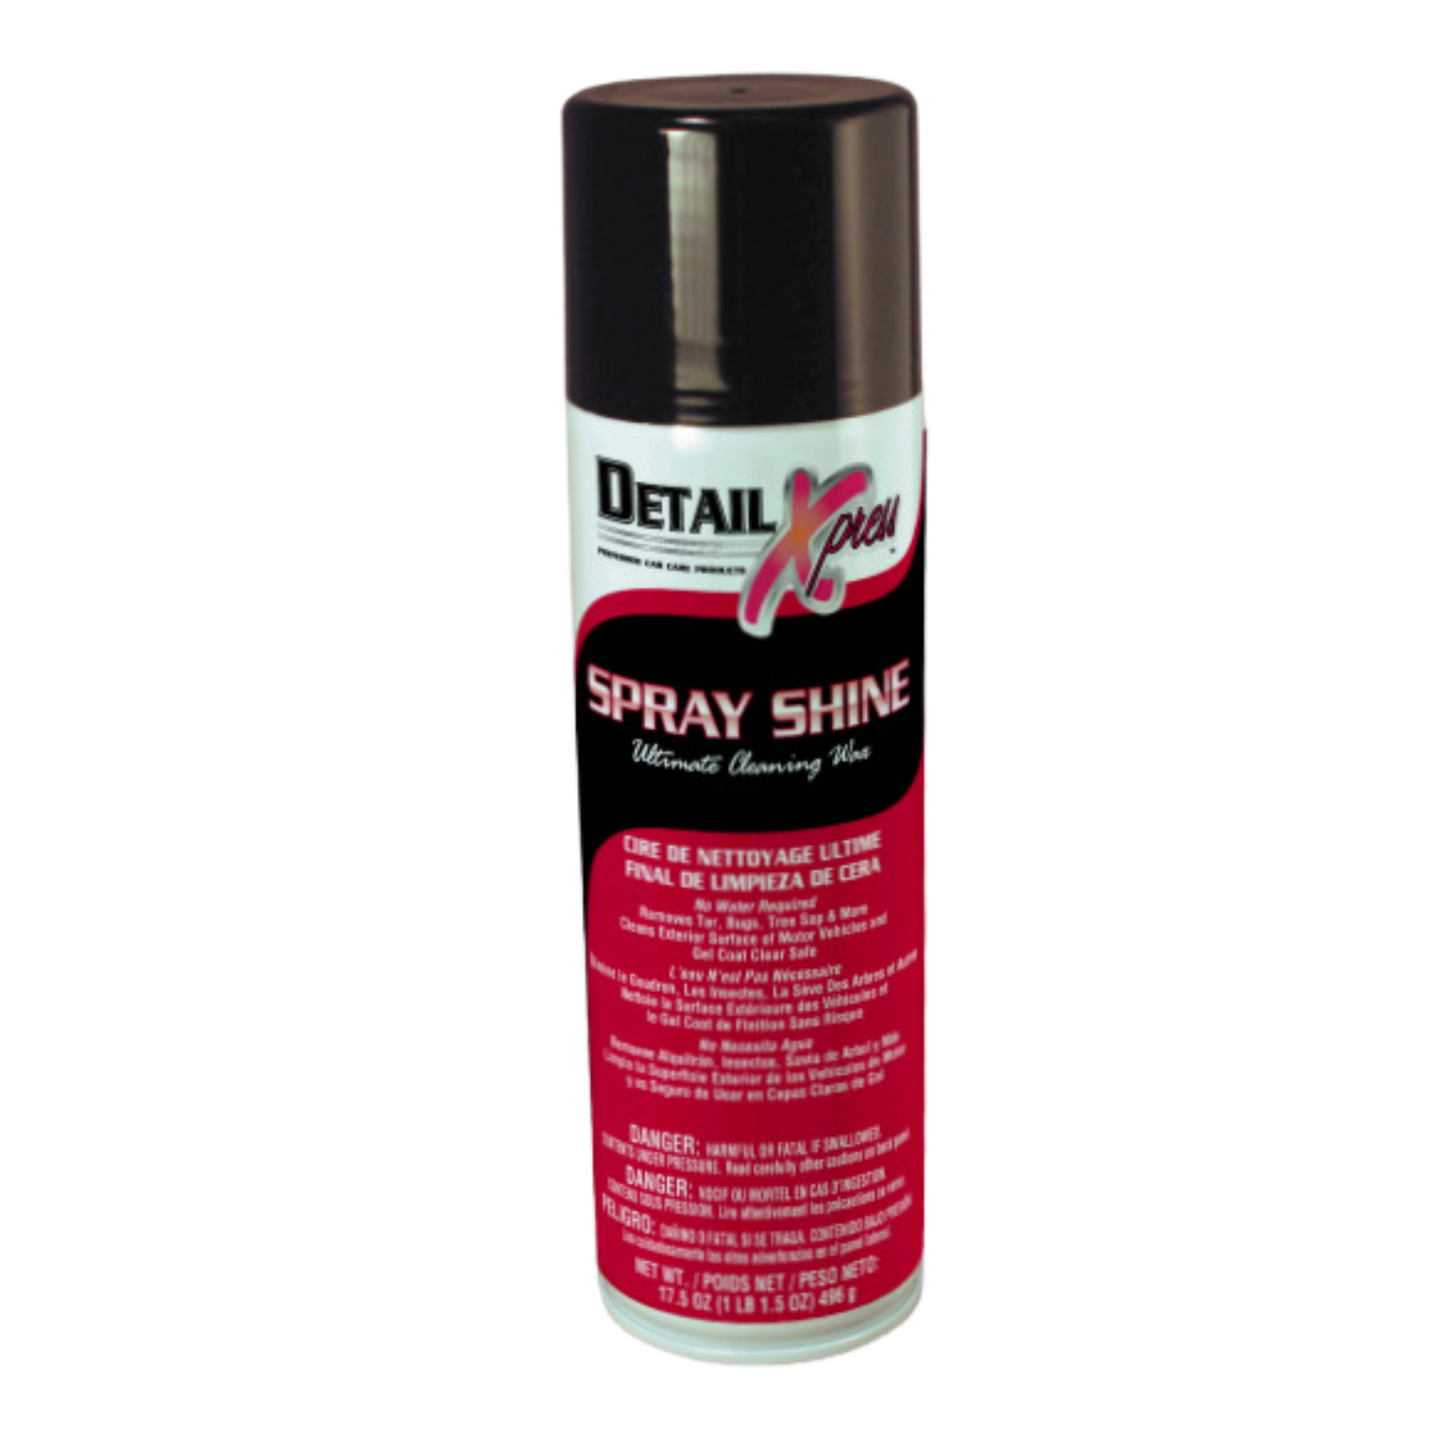 Detail Xpress Spray Shine Ultimate Cleaning Wax 17.5oz